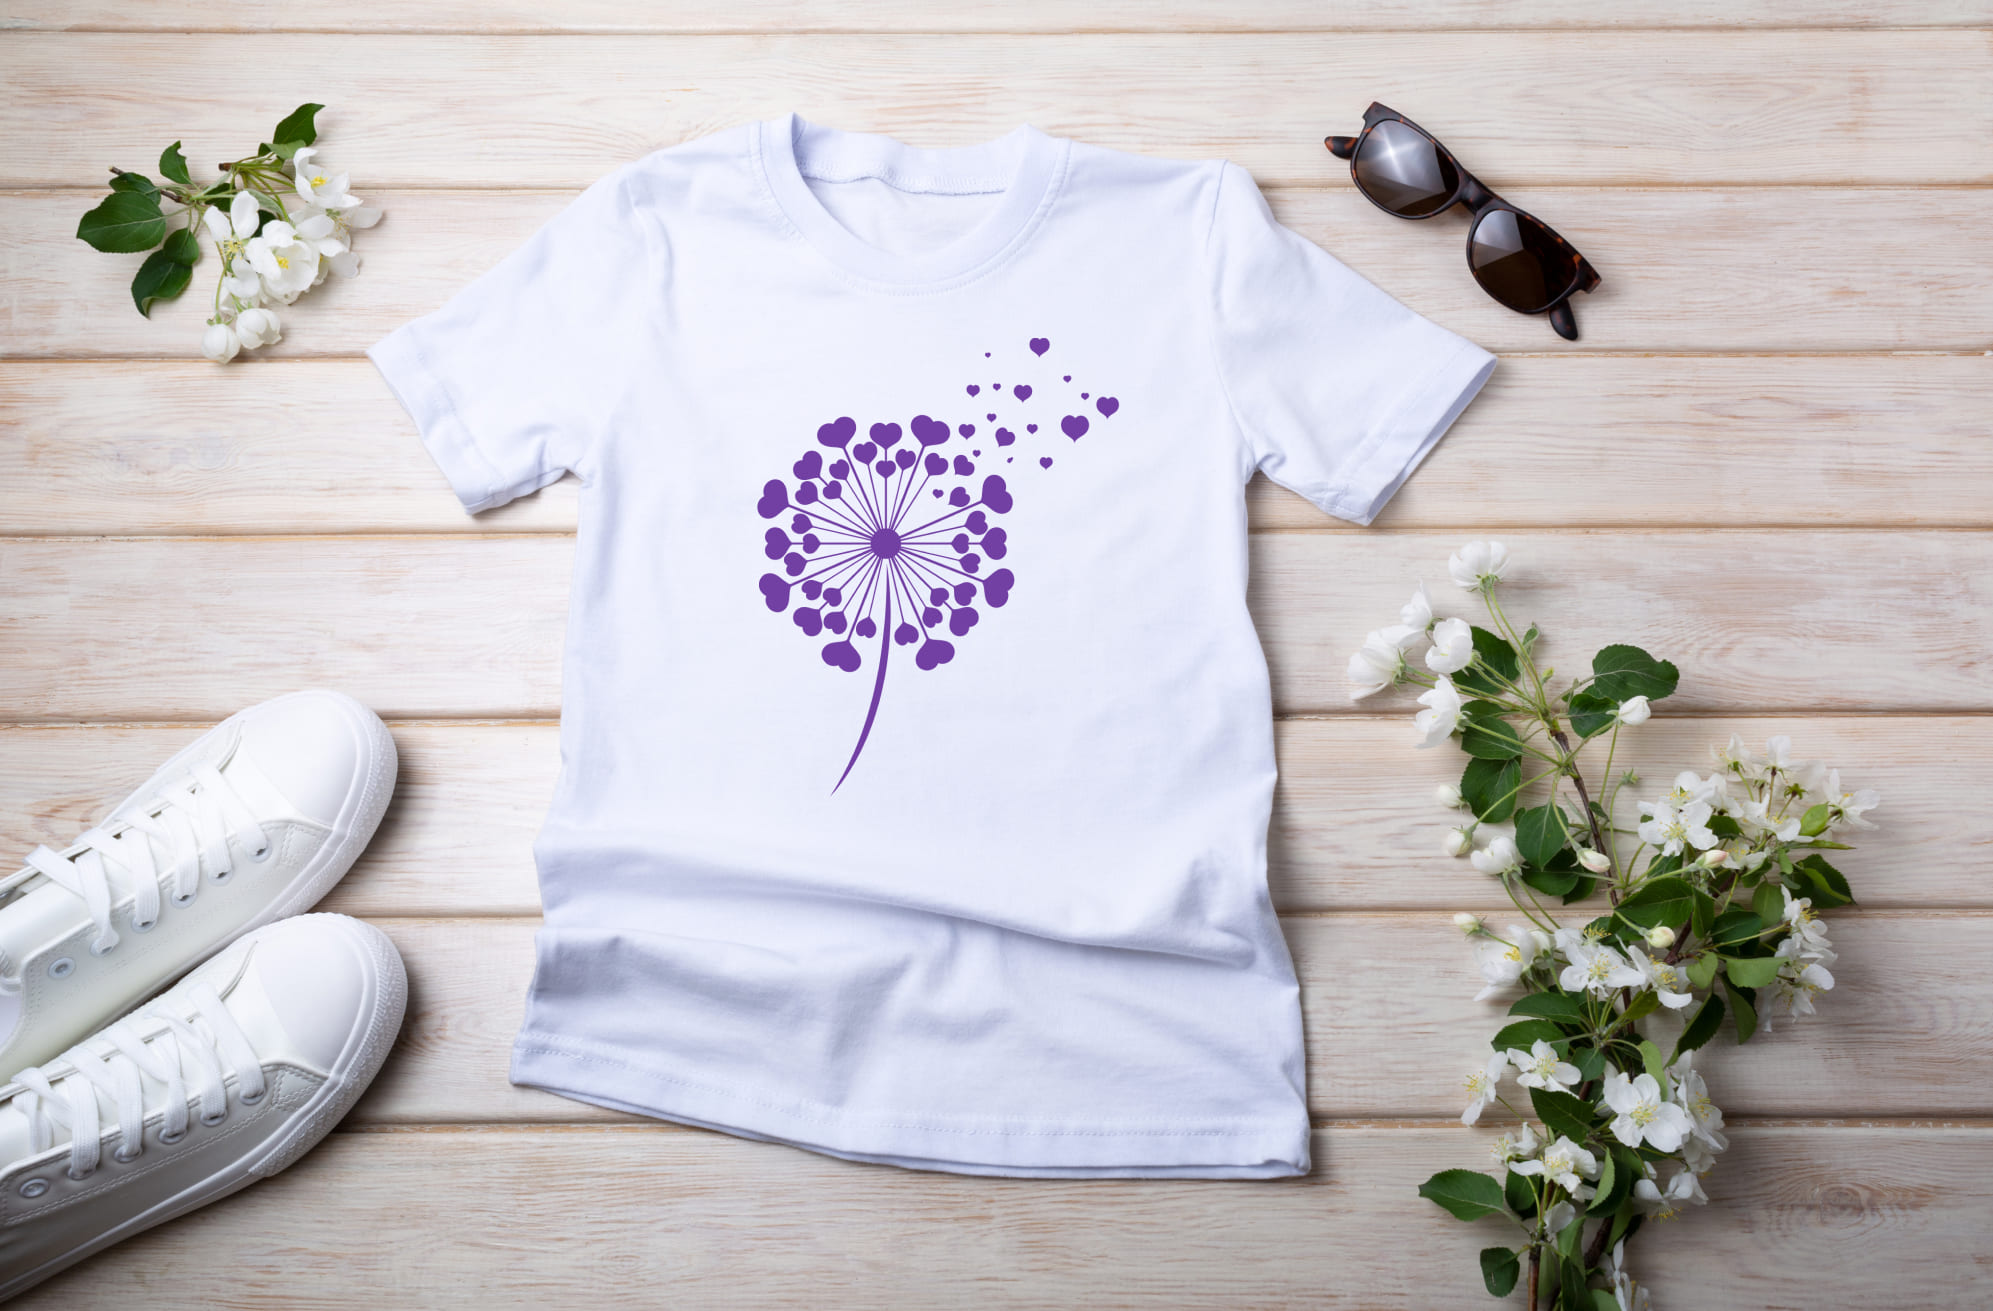 White T-shirt with purple dandelion flower and sunglasses with white sneakers.